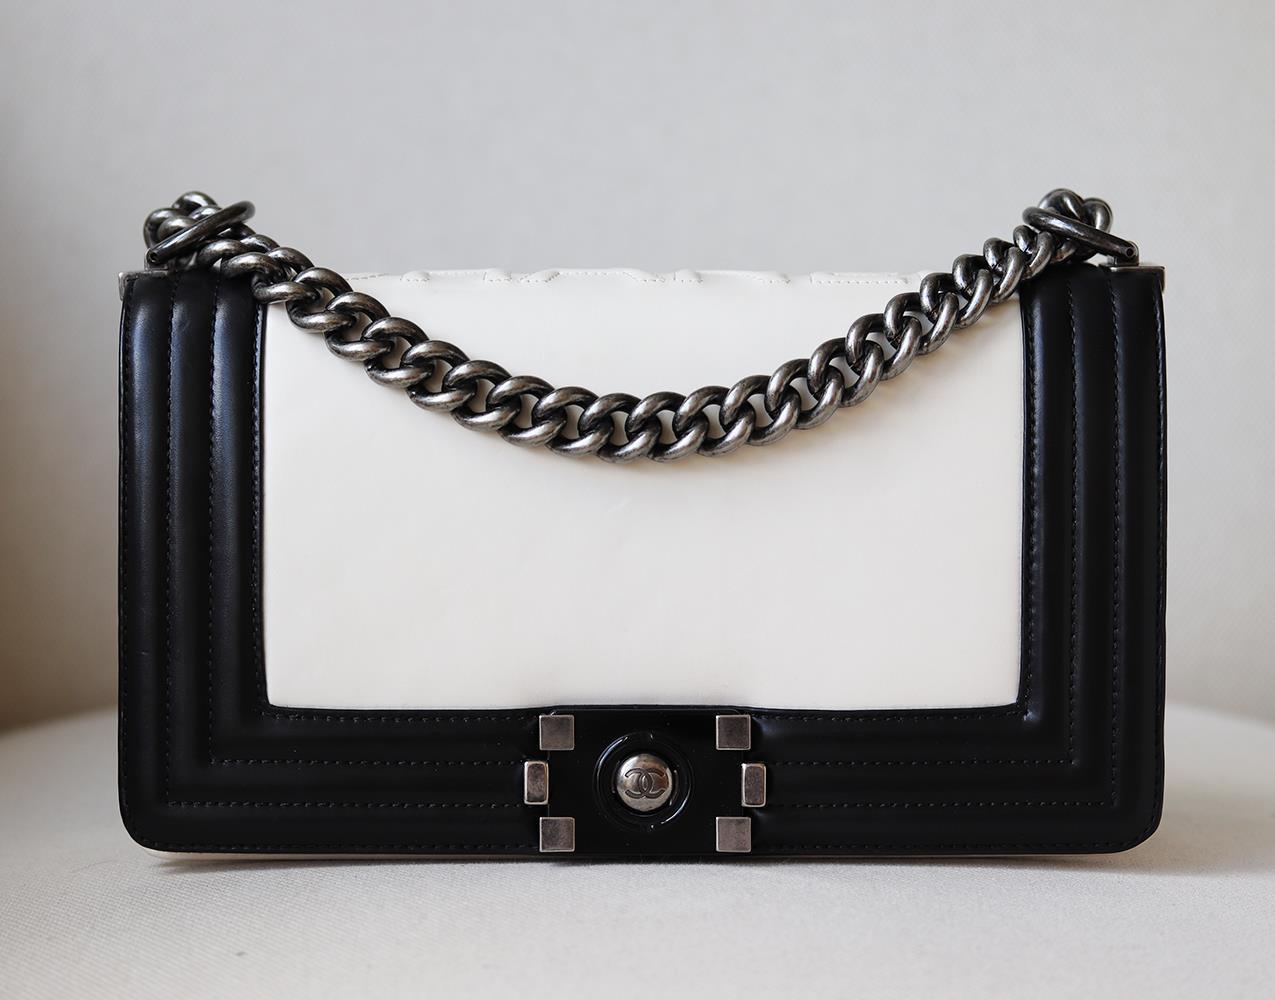 Chanel Glazed Calfskin Leather Boy Flap Bag has been hand-finished by skilled artisans in the label's workshop. Boasting smooth black and ivory calfskin-leather exterior, this design is accented with silver-toned and black calfskin-leather chain